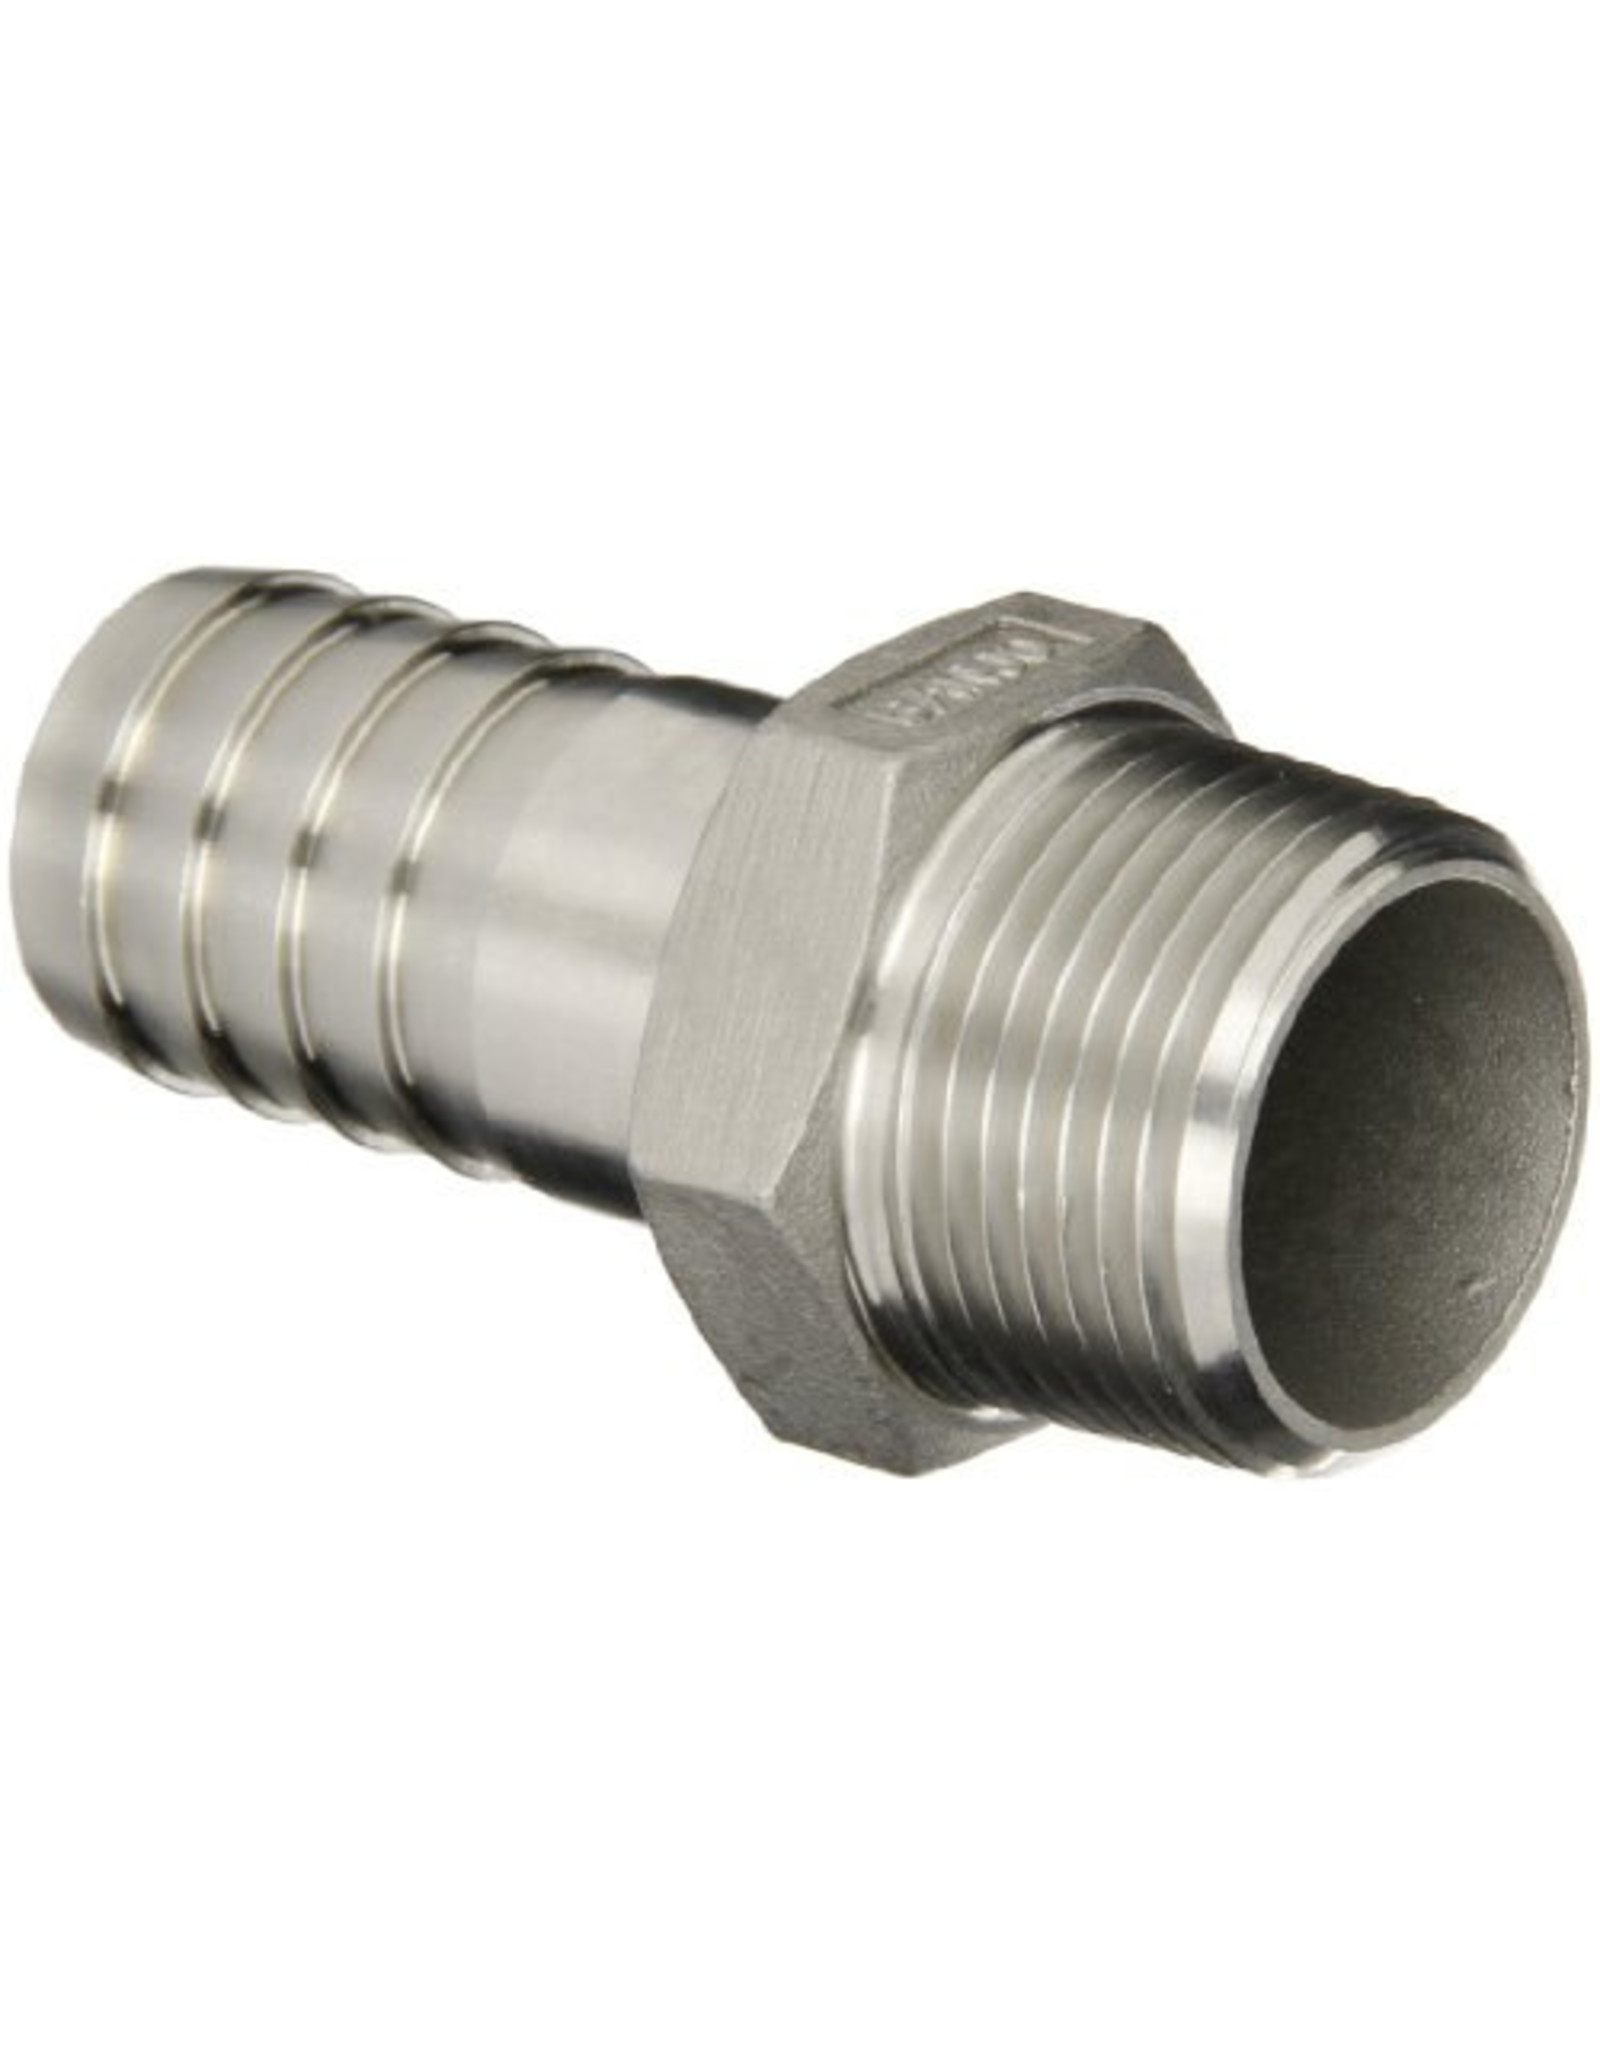 Hex Adapter 1/2" barb/1/2"male